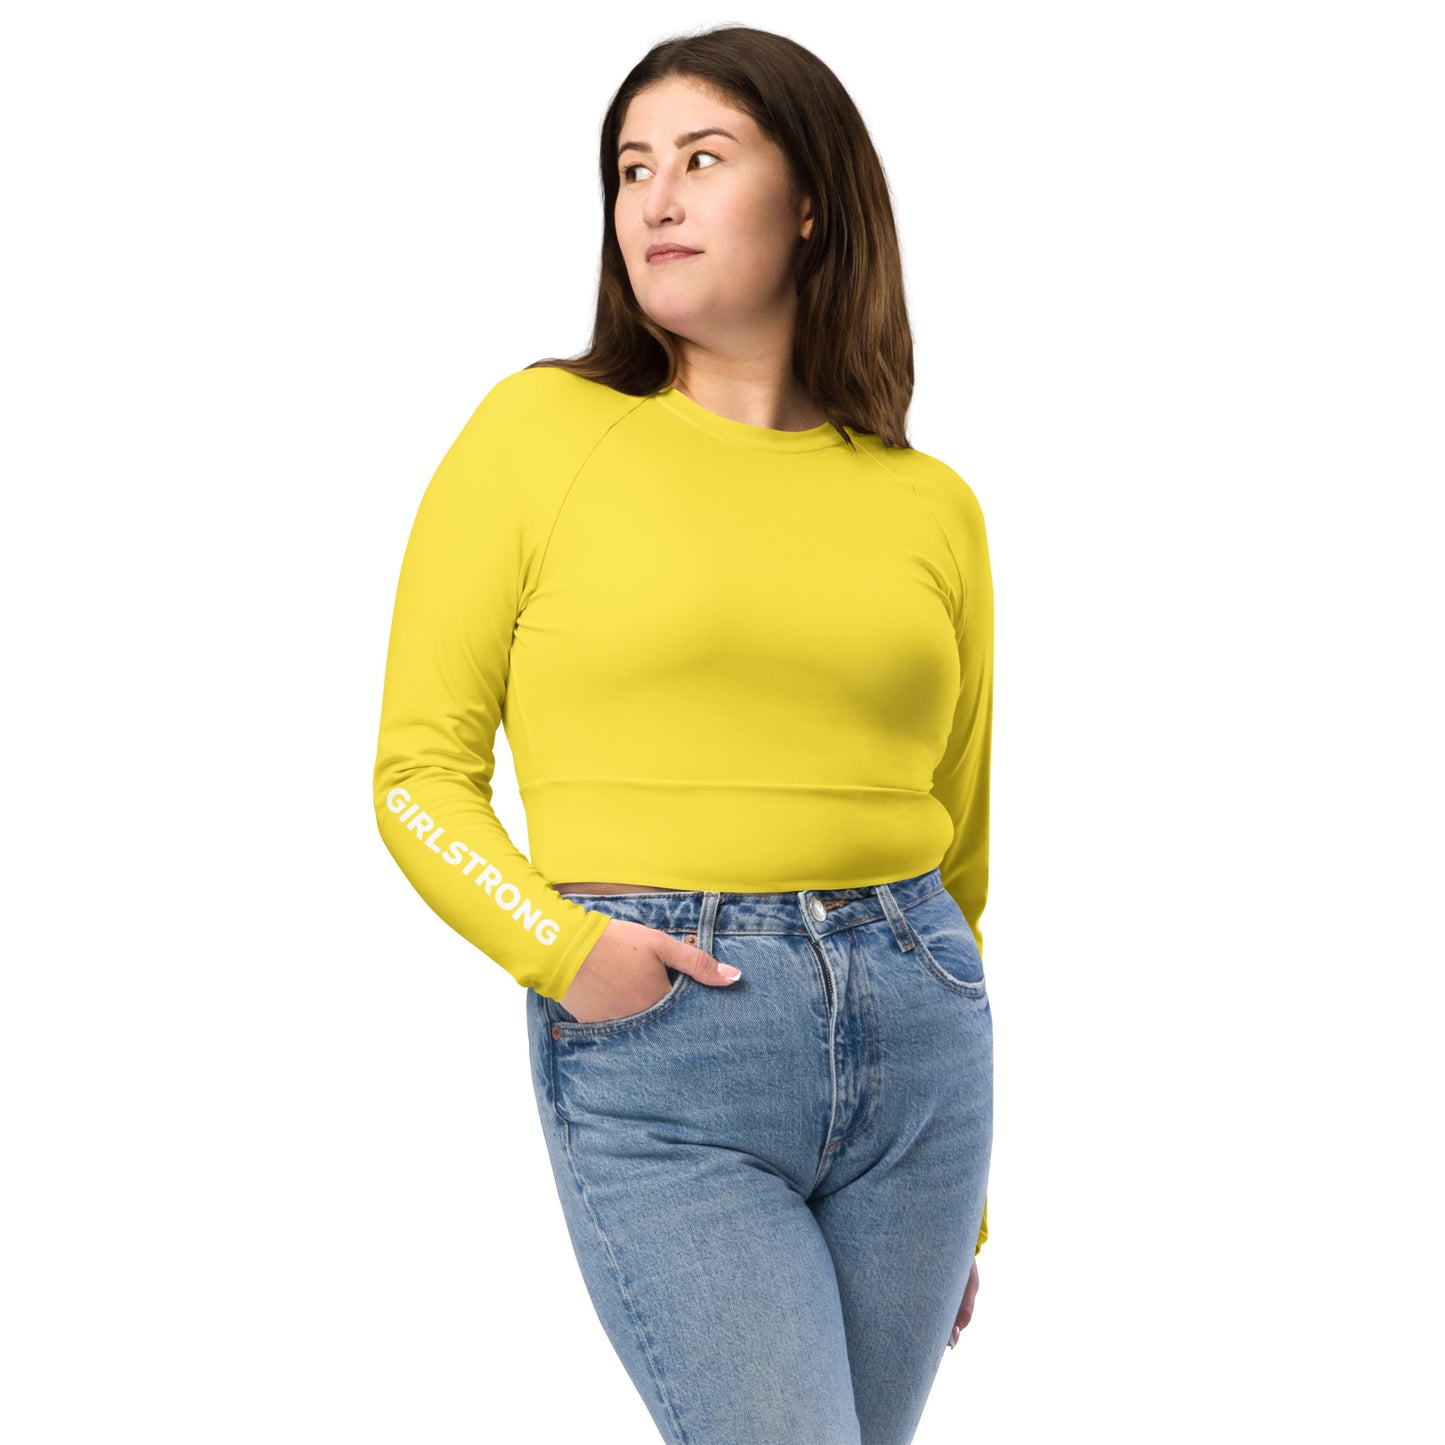 THE ESSENTIAL LONG SLEEVE FITTED CROP TOP BRIGHT YELLOW